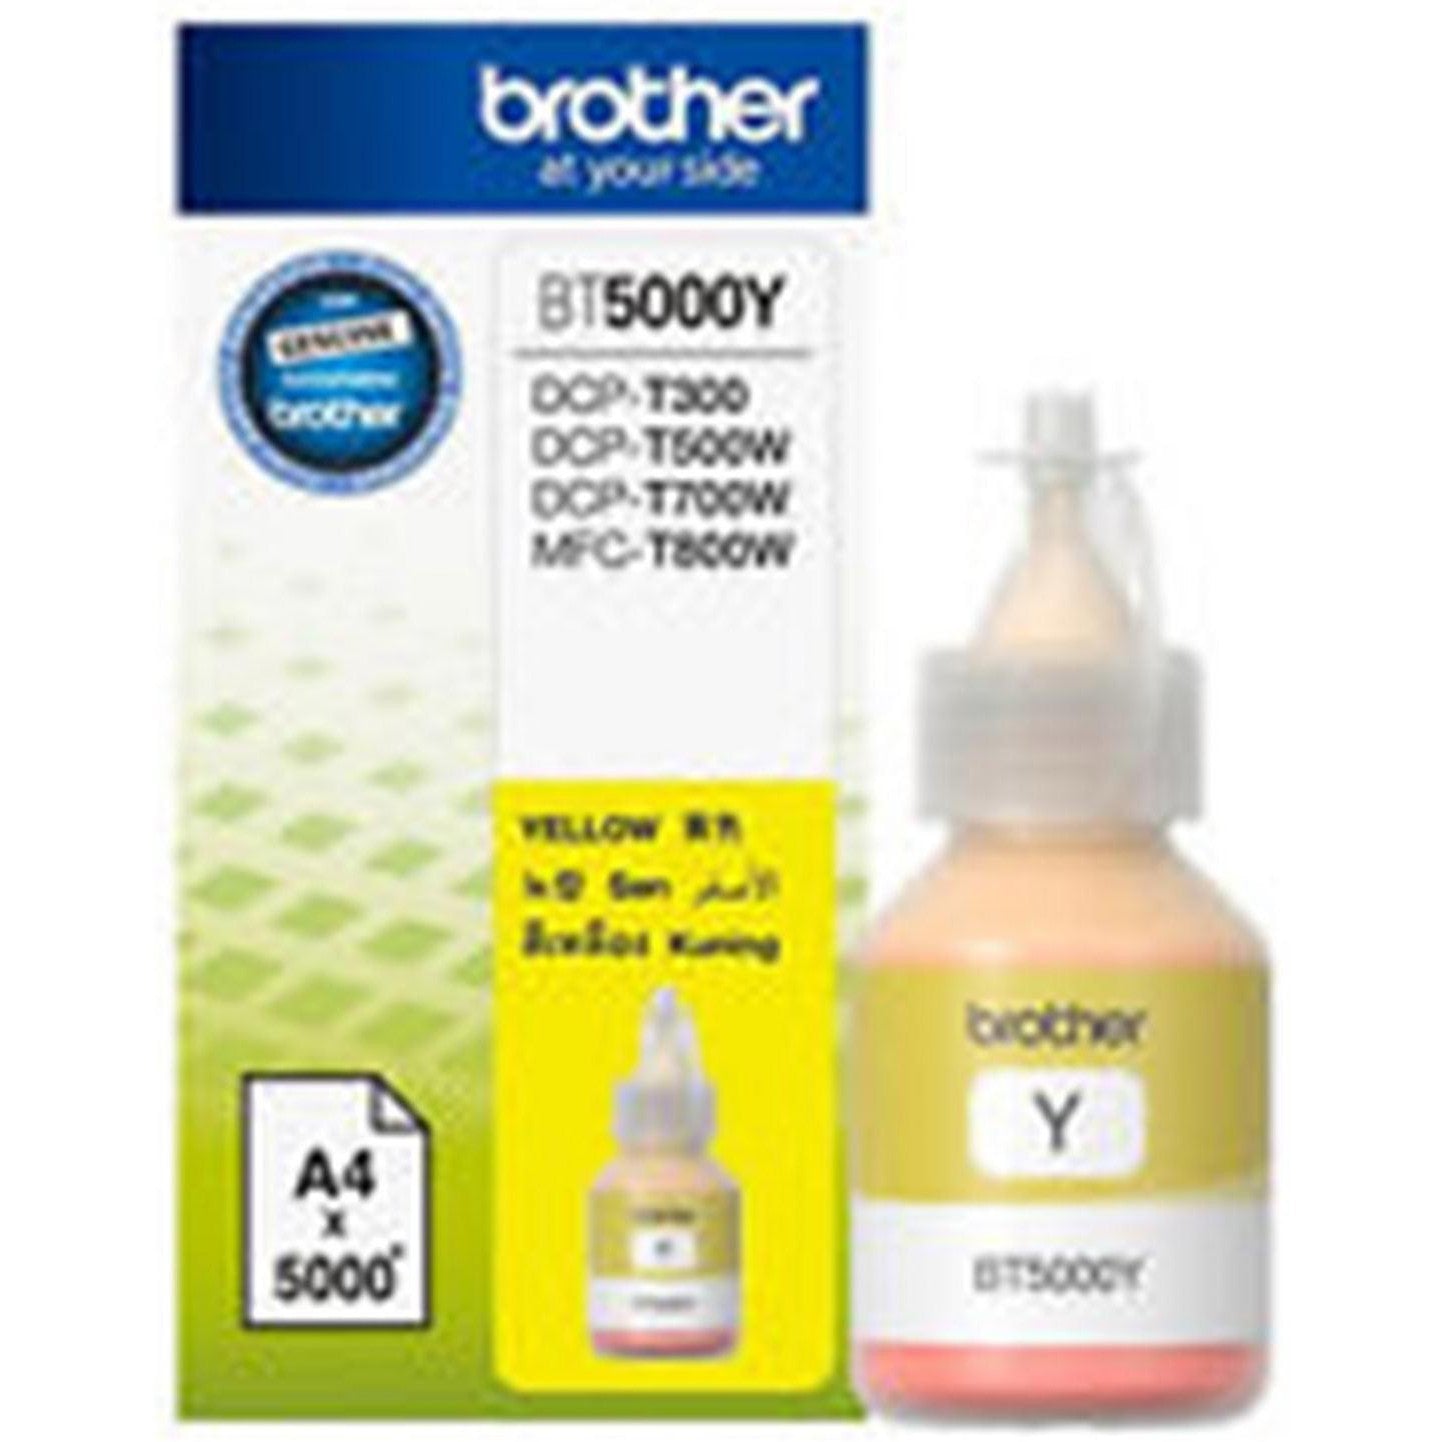 Brother Bt 5000 Yellow Ink Cartridge-Inks And Toners-Brother-Star Light Kuwait